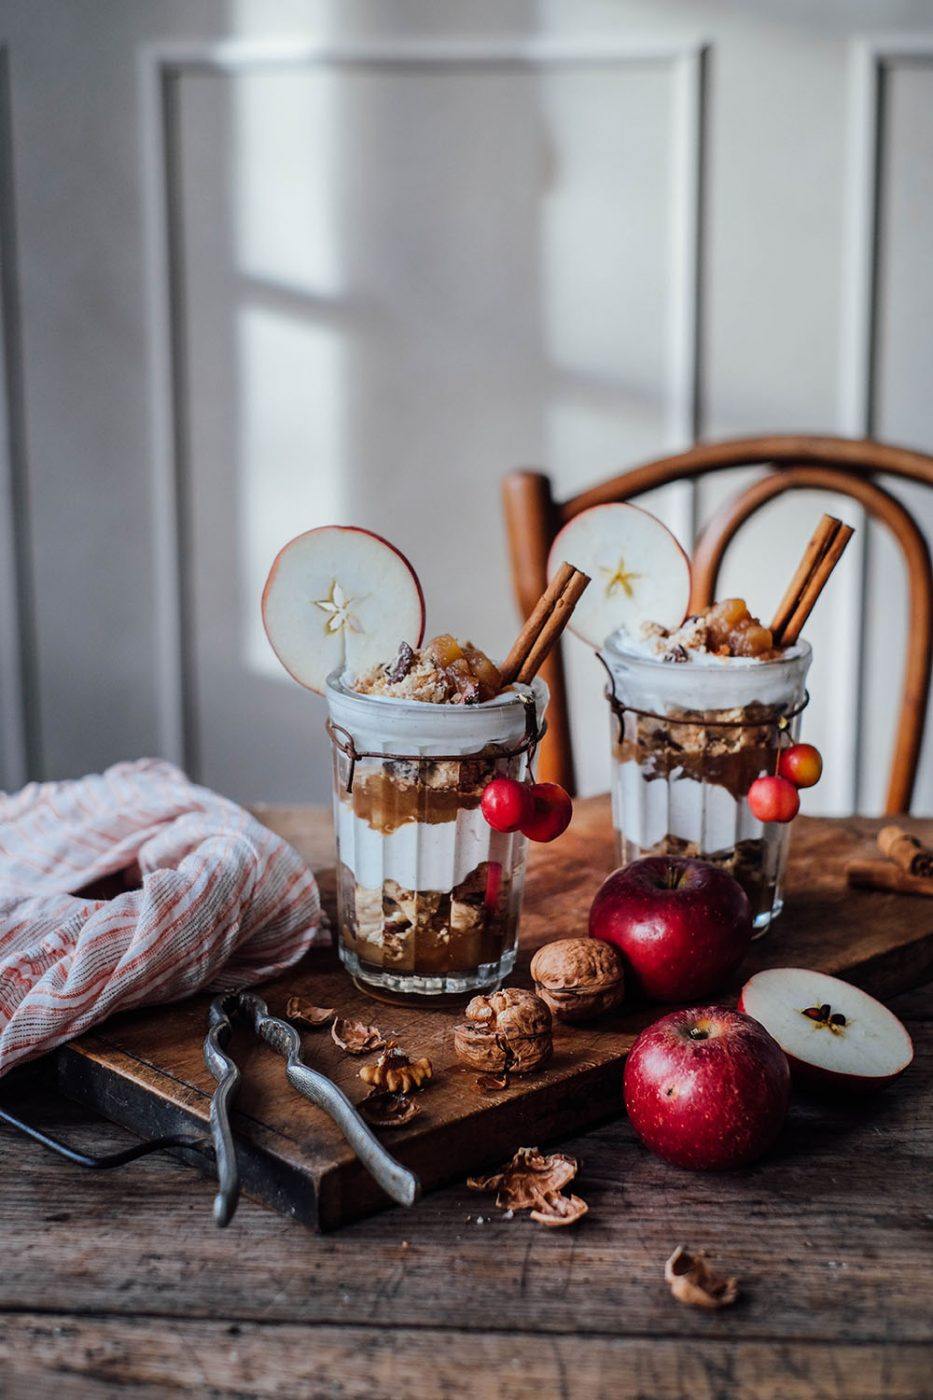 Image for Gluten-free Apple Crumble in a Glass with Walnuts and Oats